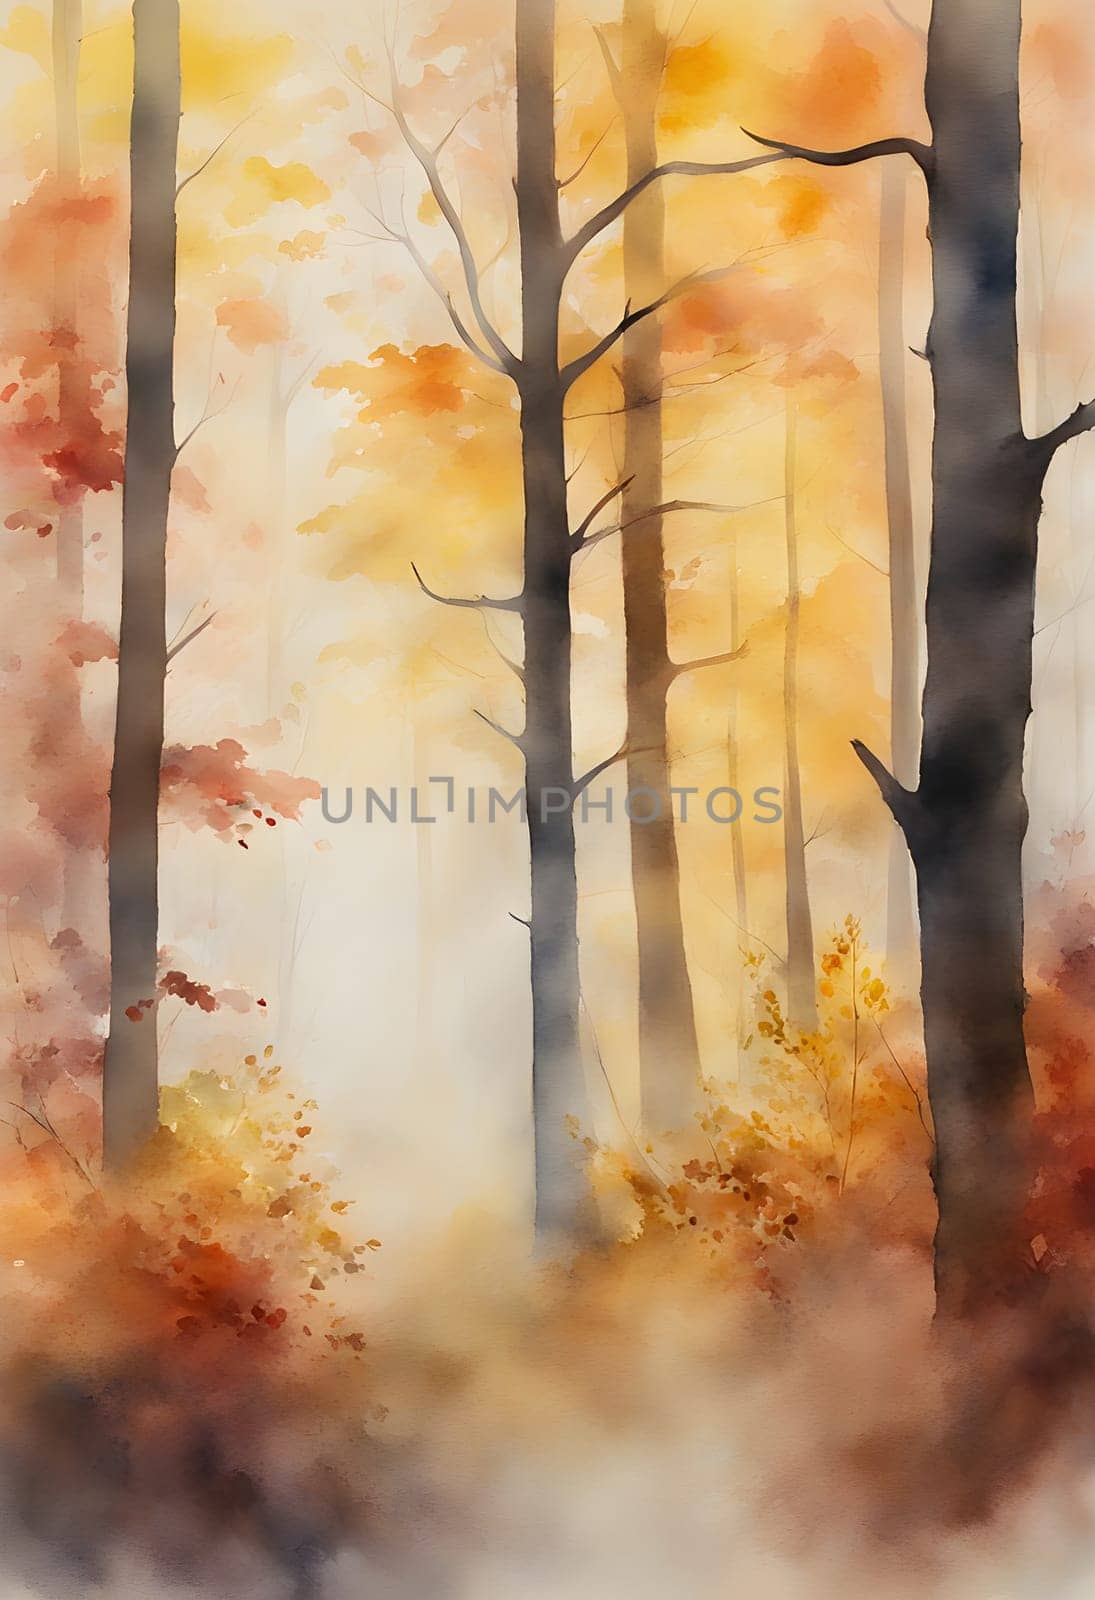 watercolor painting of autumn forest with fog. The trees are covered in leaves of various colors, including yellow, orange, red and brown. mystery and romance. by rostik924